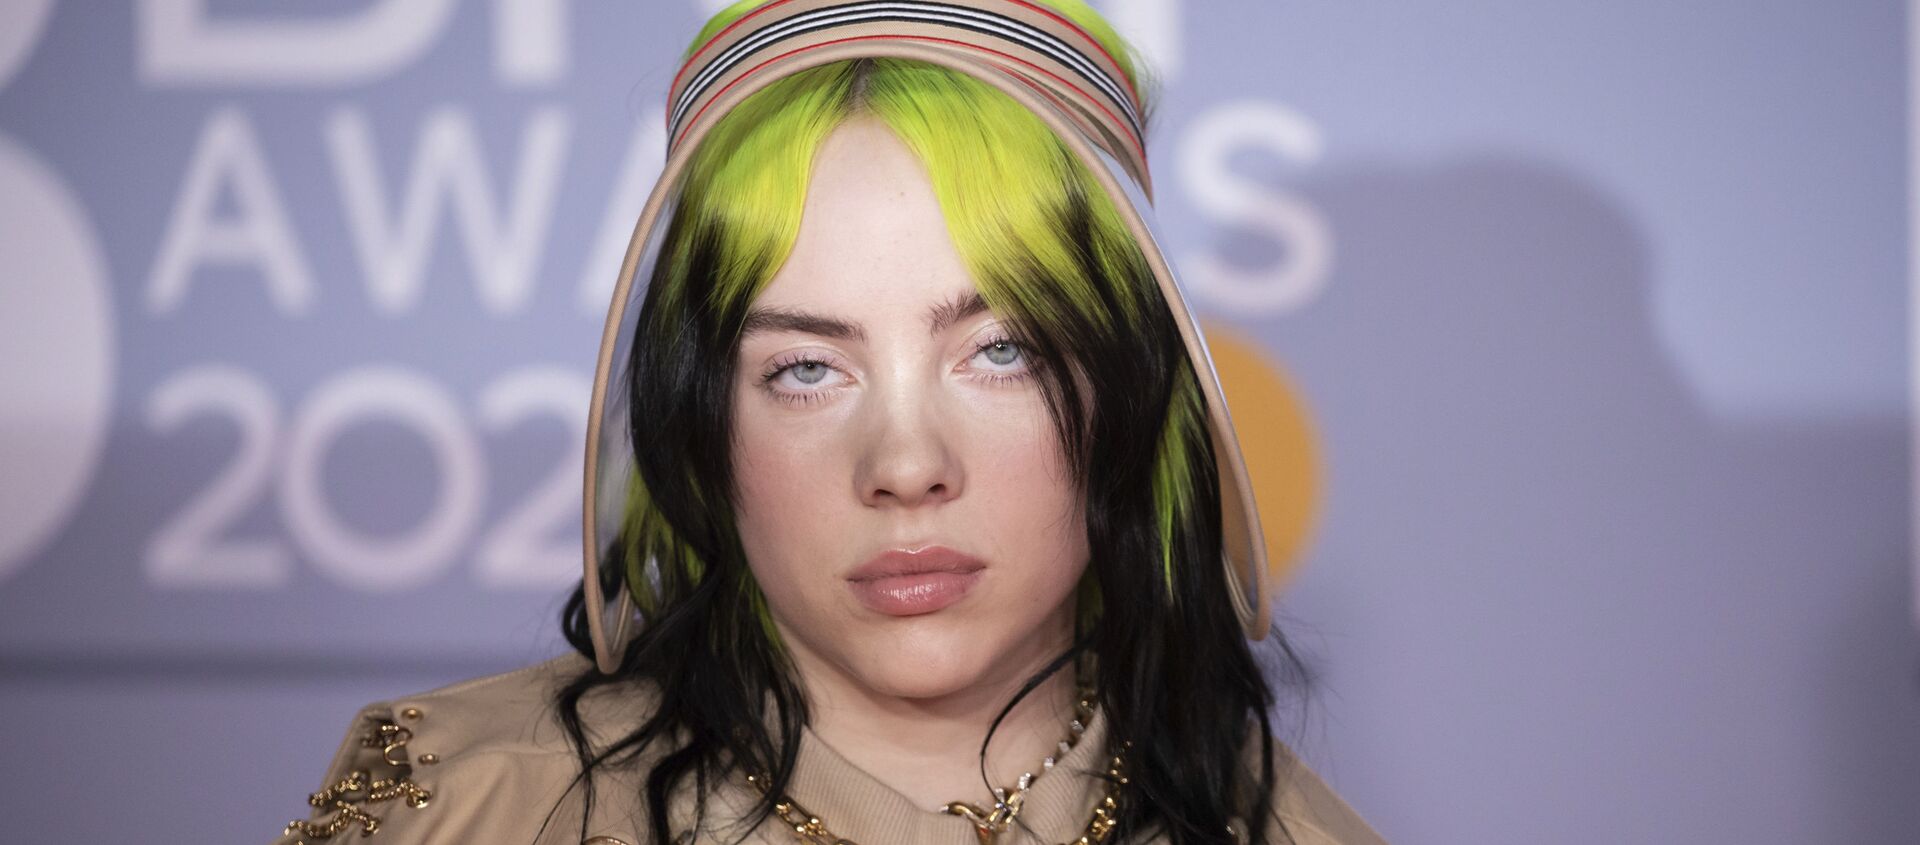 Billie Eilish poses for photographers upon arrival at Brit Awards 2020 in London, Tuesday, Feb. 18, 2020. - 俄罗斯卫星通讯社, 1920, 22.06.2021